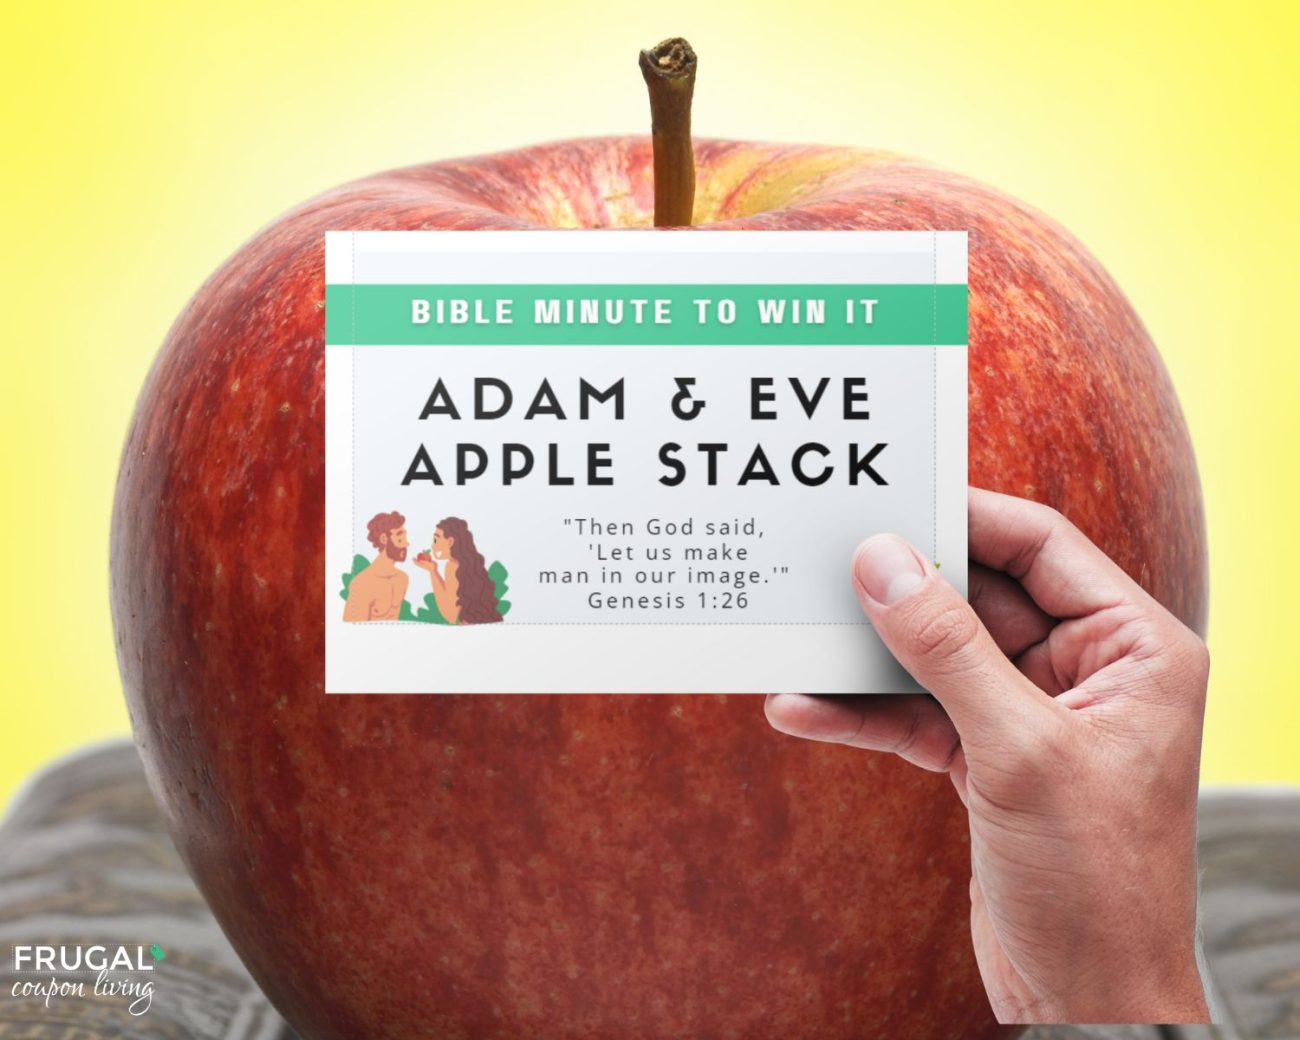 apple stack bible minute to win it game for adam and eve leasson for kids